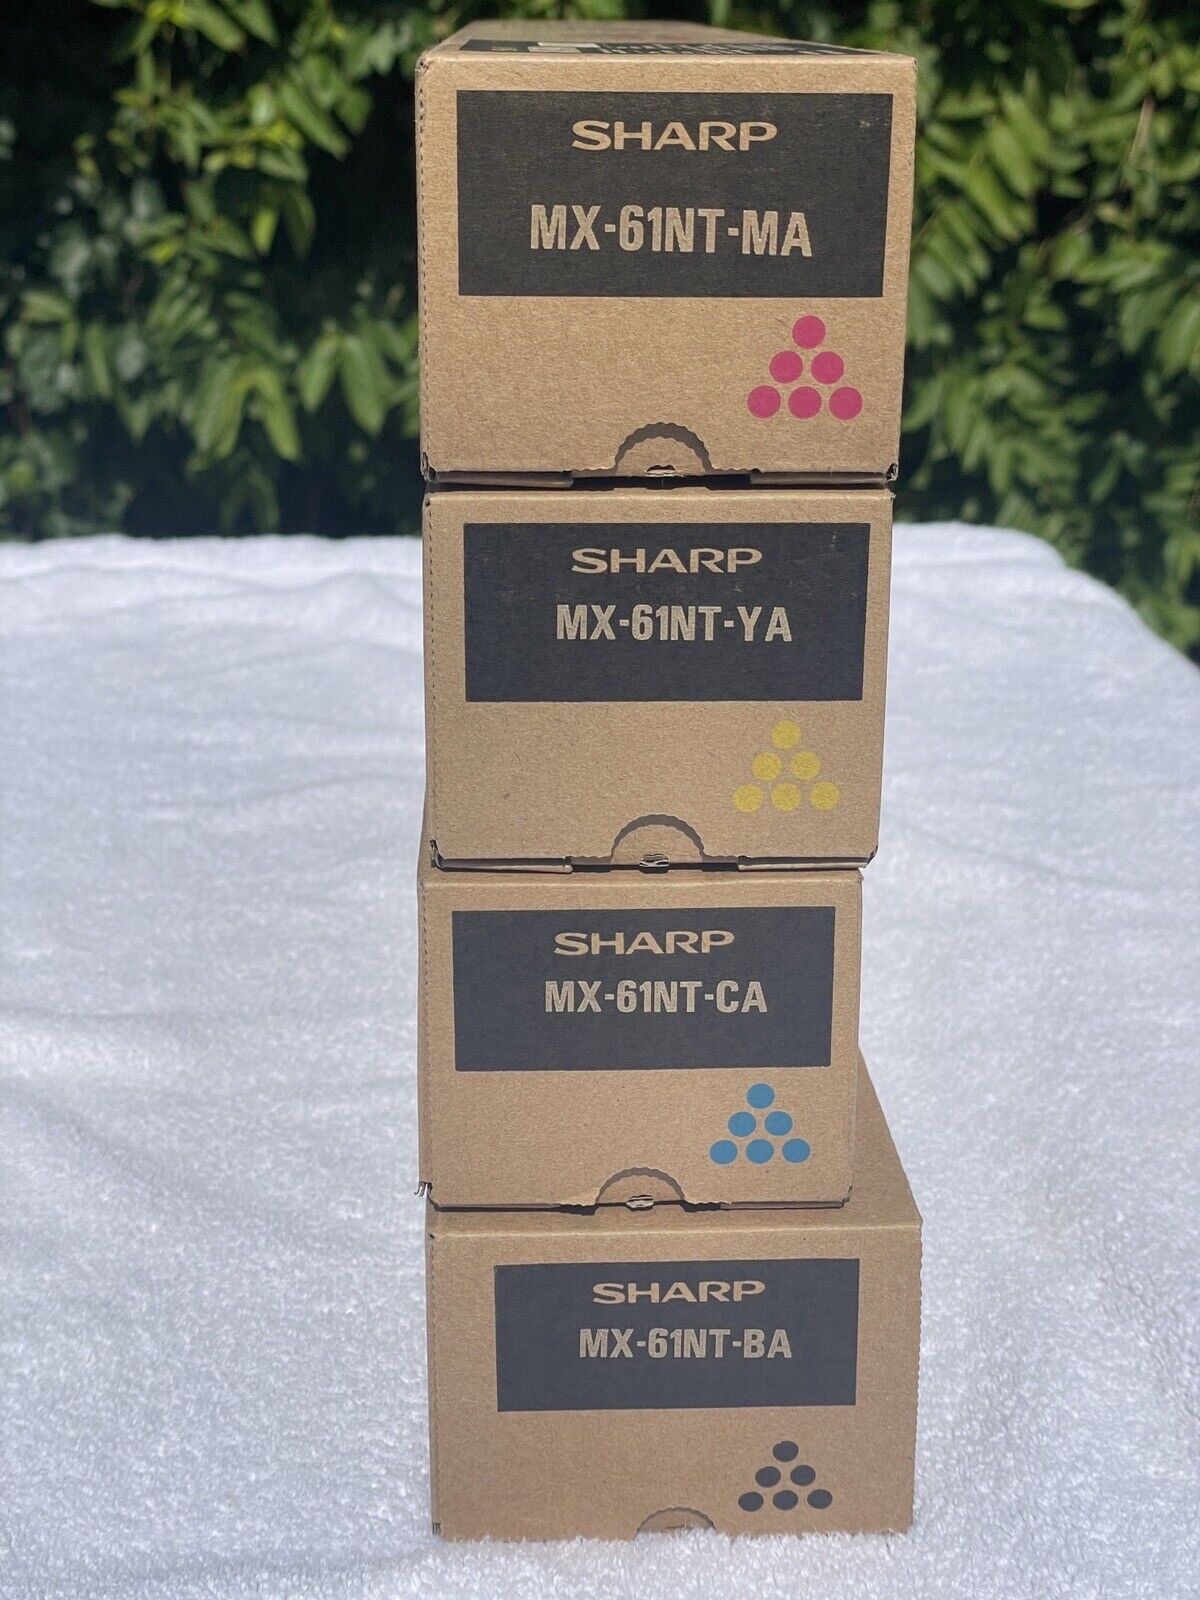 Sharp MX61nt-BA,MX-61nt-CA,MX-61nt-YA,MX-61nt-MA READ:SHIPS TO LOWER 48 ONLY